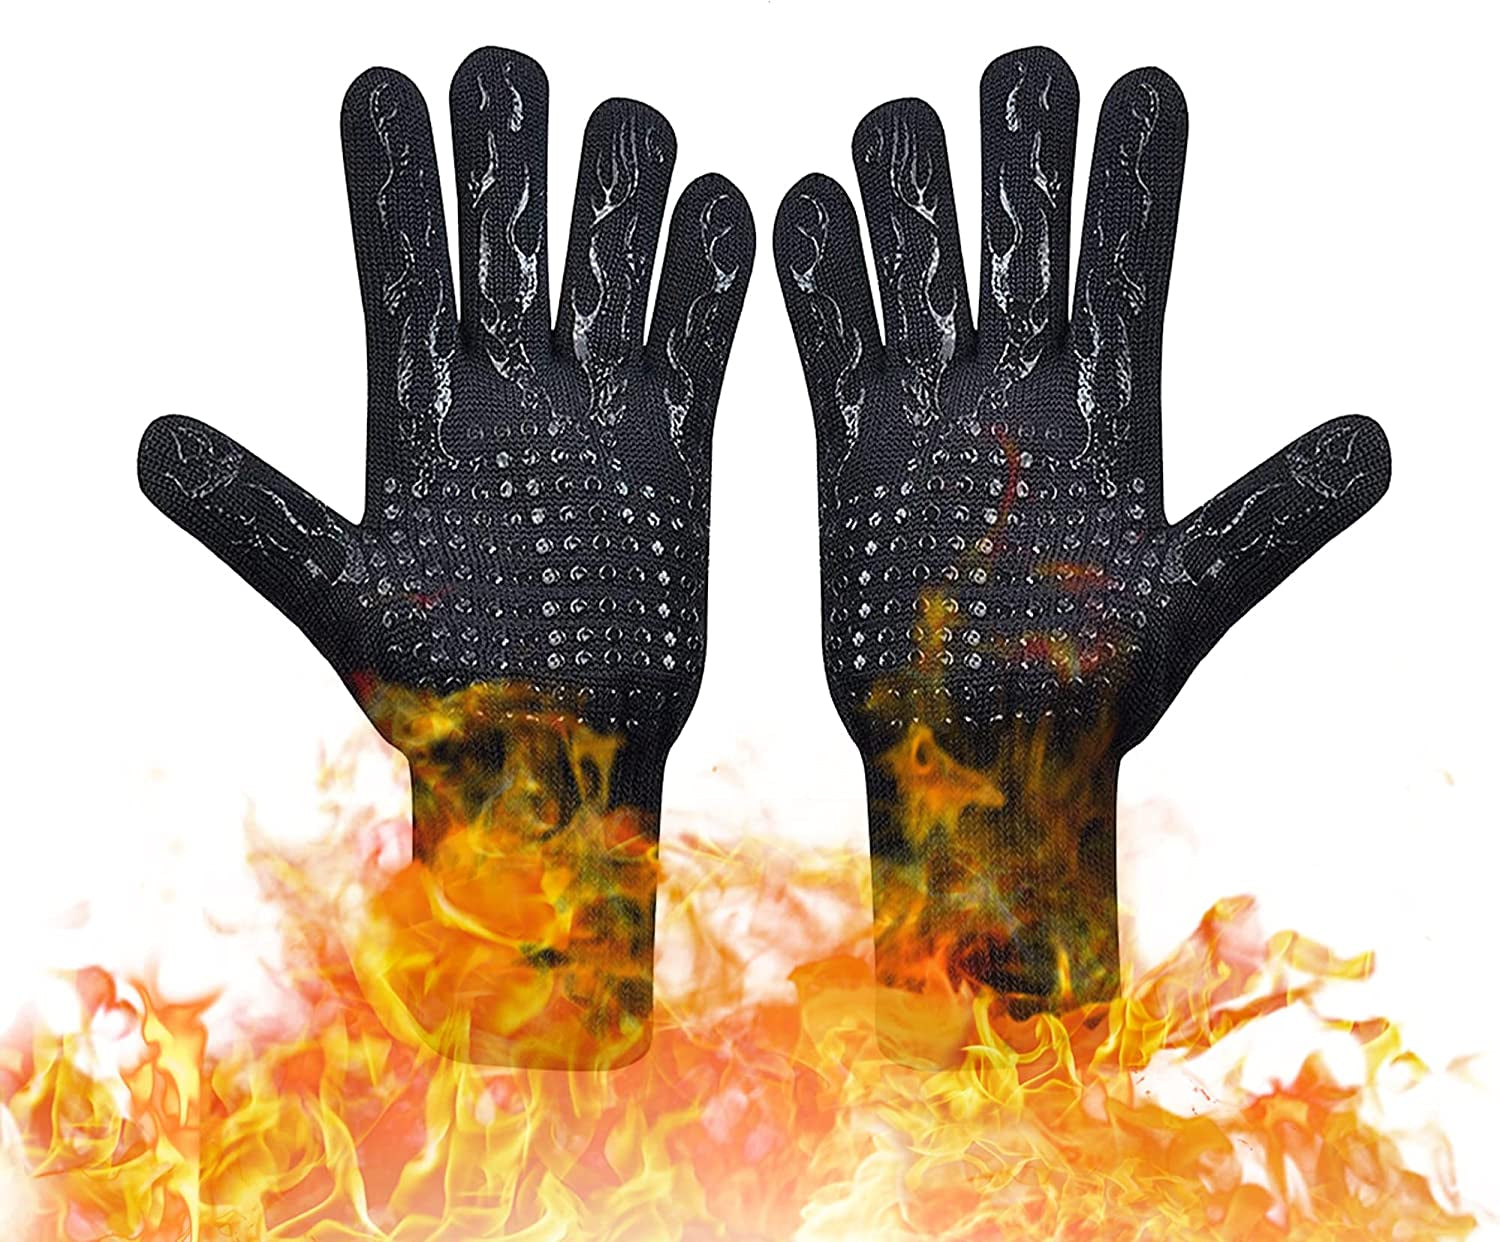 Koncle, Koncle BBQ Grill Gloves, Heat Resistant BBQ Gloves, Heatproof Upto 500 Degree Celsius, Cooking Grilling Fireplace Oven Anti-Slip Heat Gloves Kitchen Welding Cutting Black Gloves 2 PCS